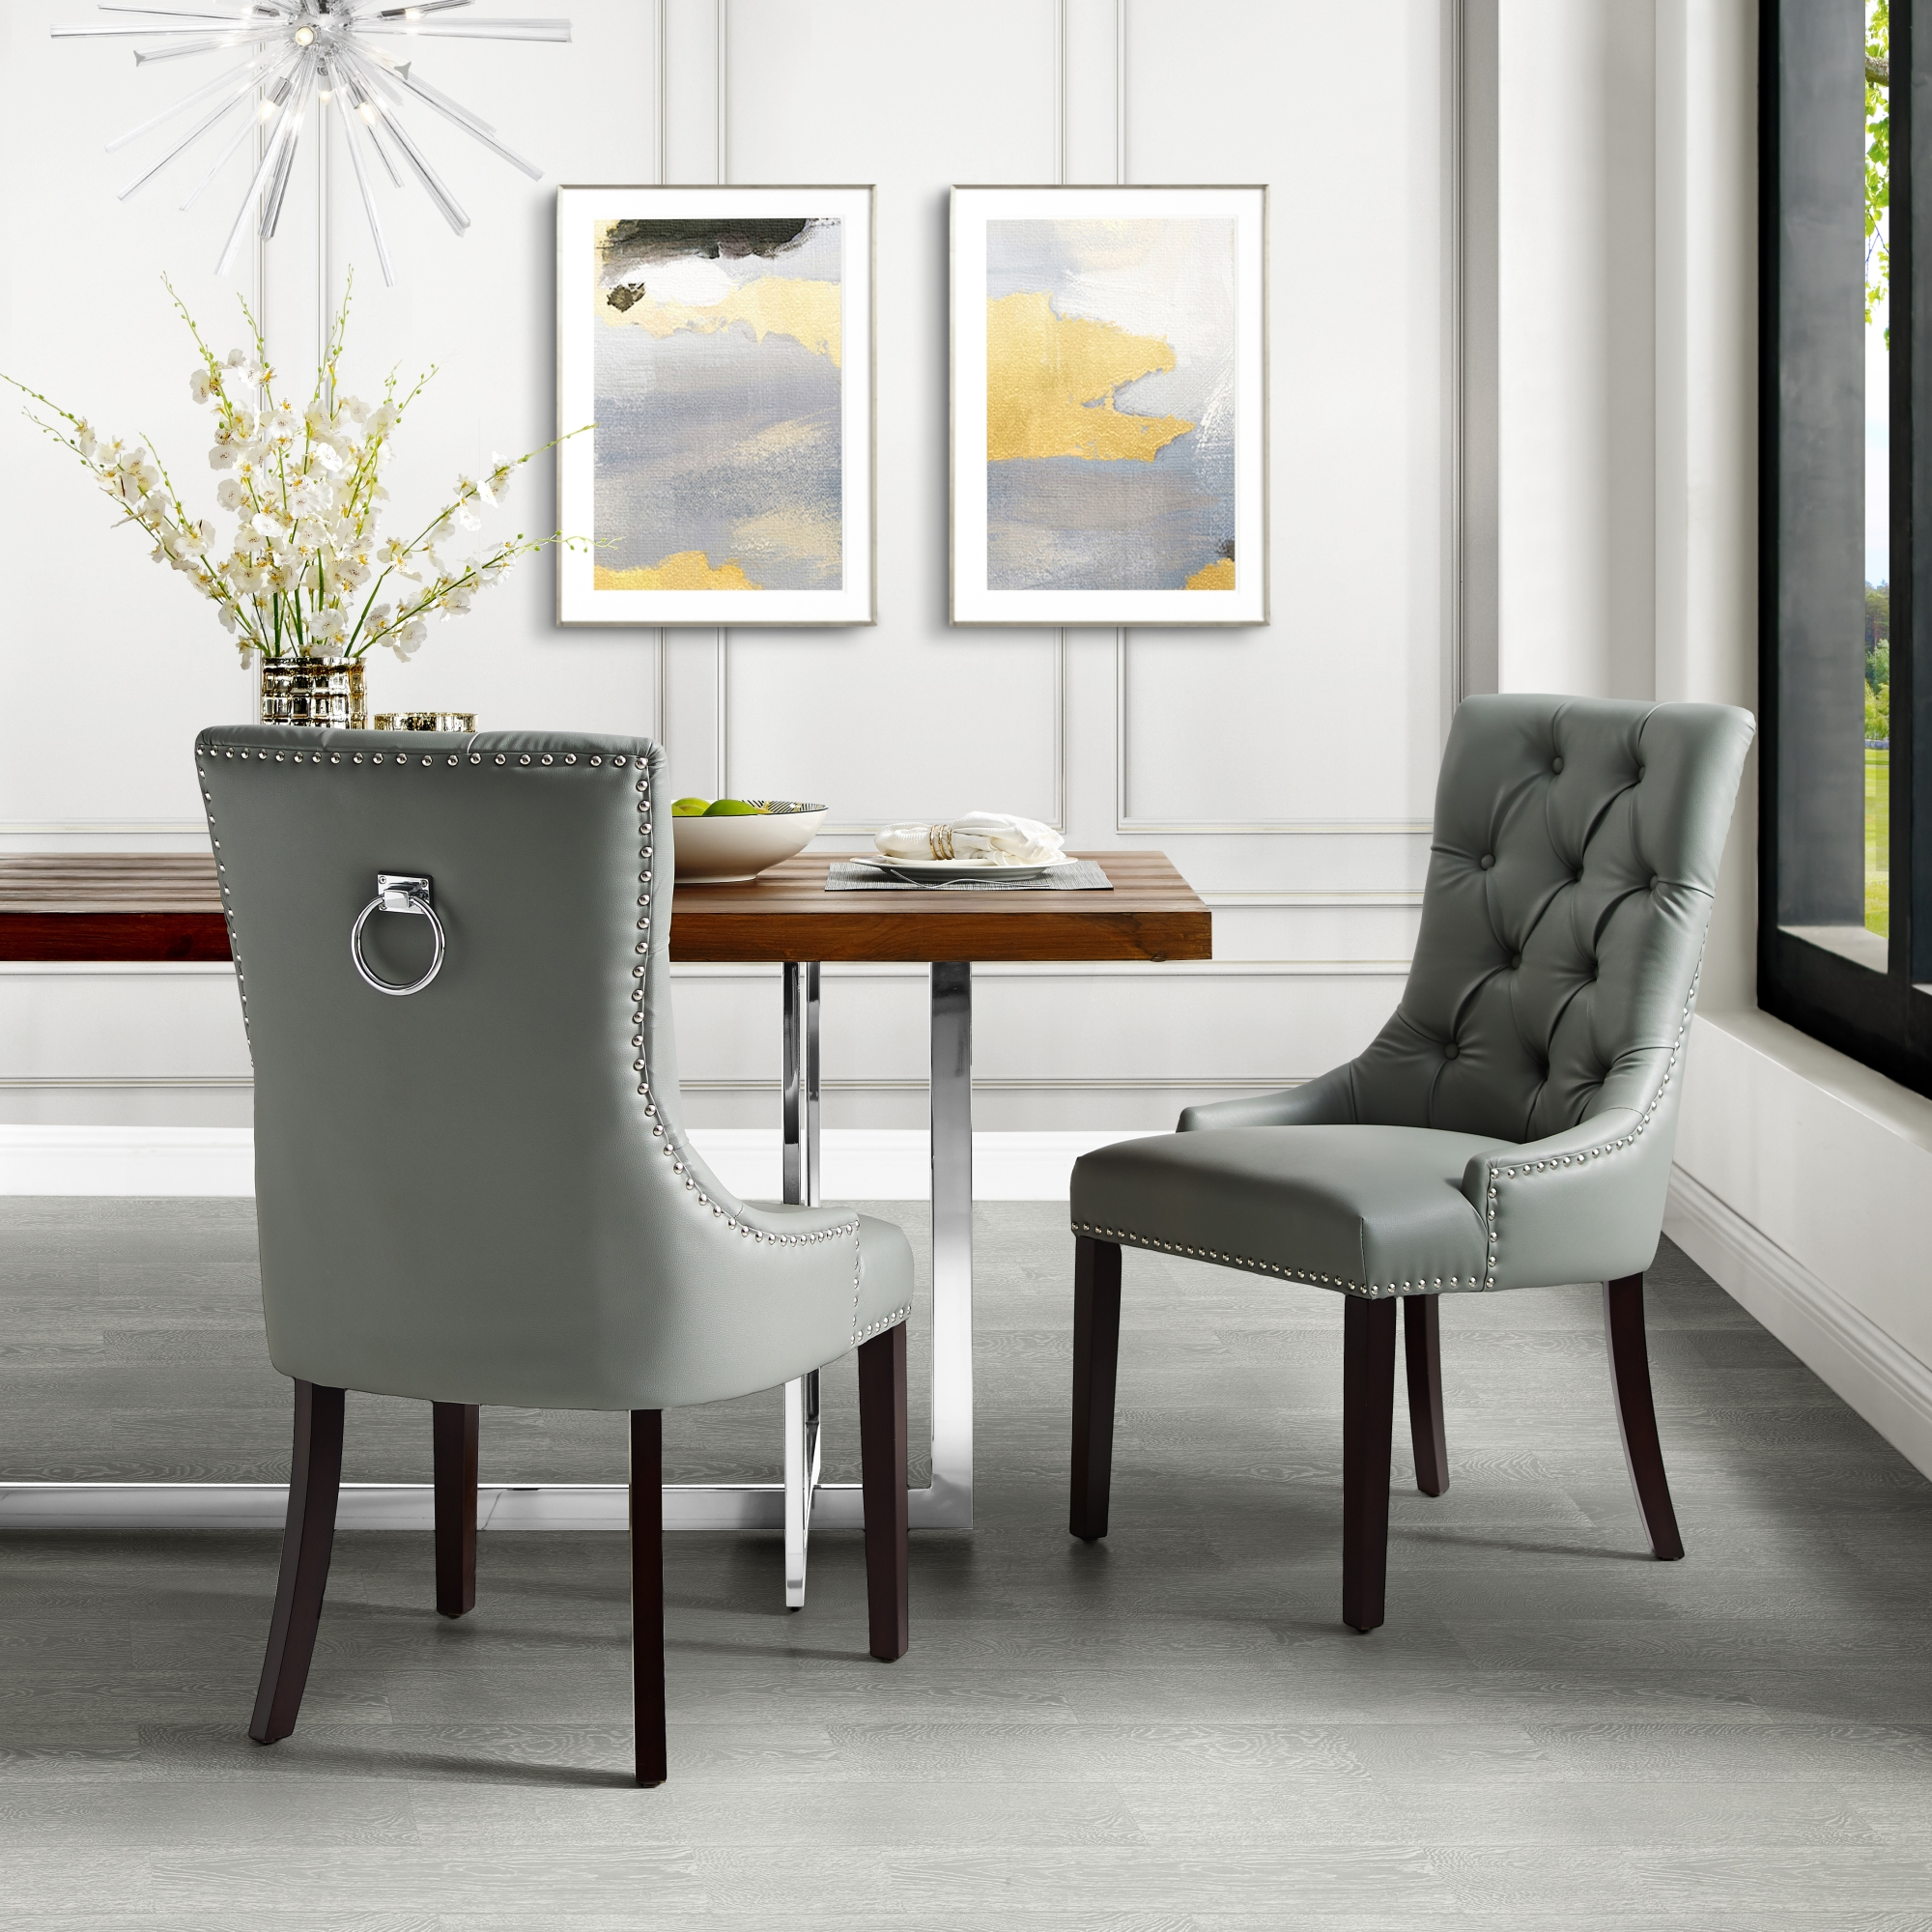 Faith Light Grey Leather Pu Dining Chair Set Of 2 Tufted Ring Handle Chrome Nailhead Finish Walmart pertaining to size 2000 X 2000